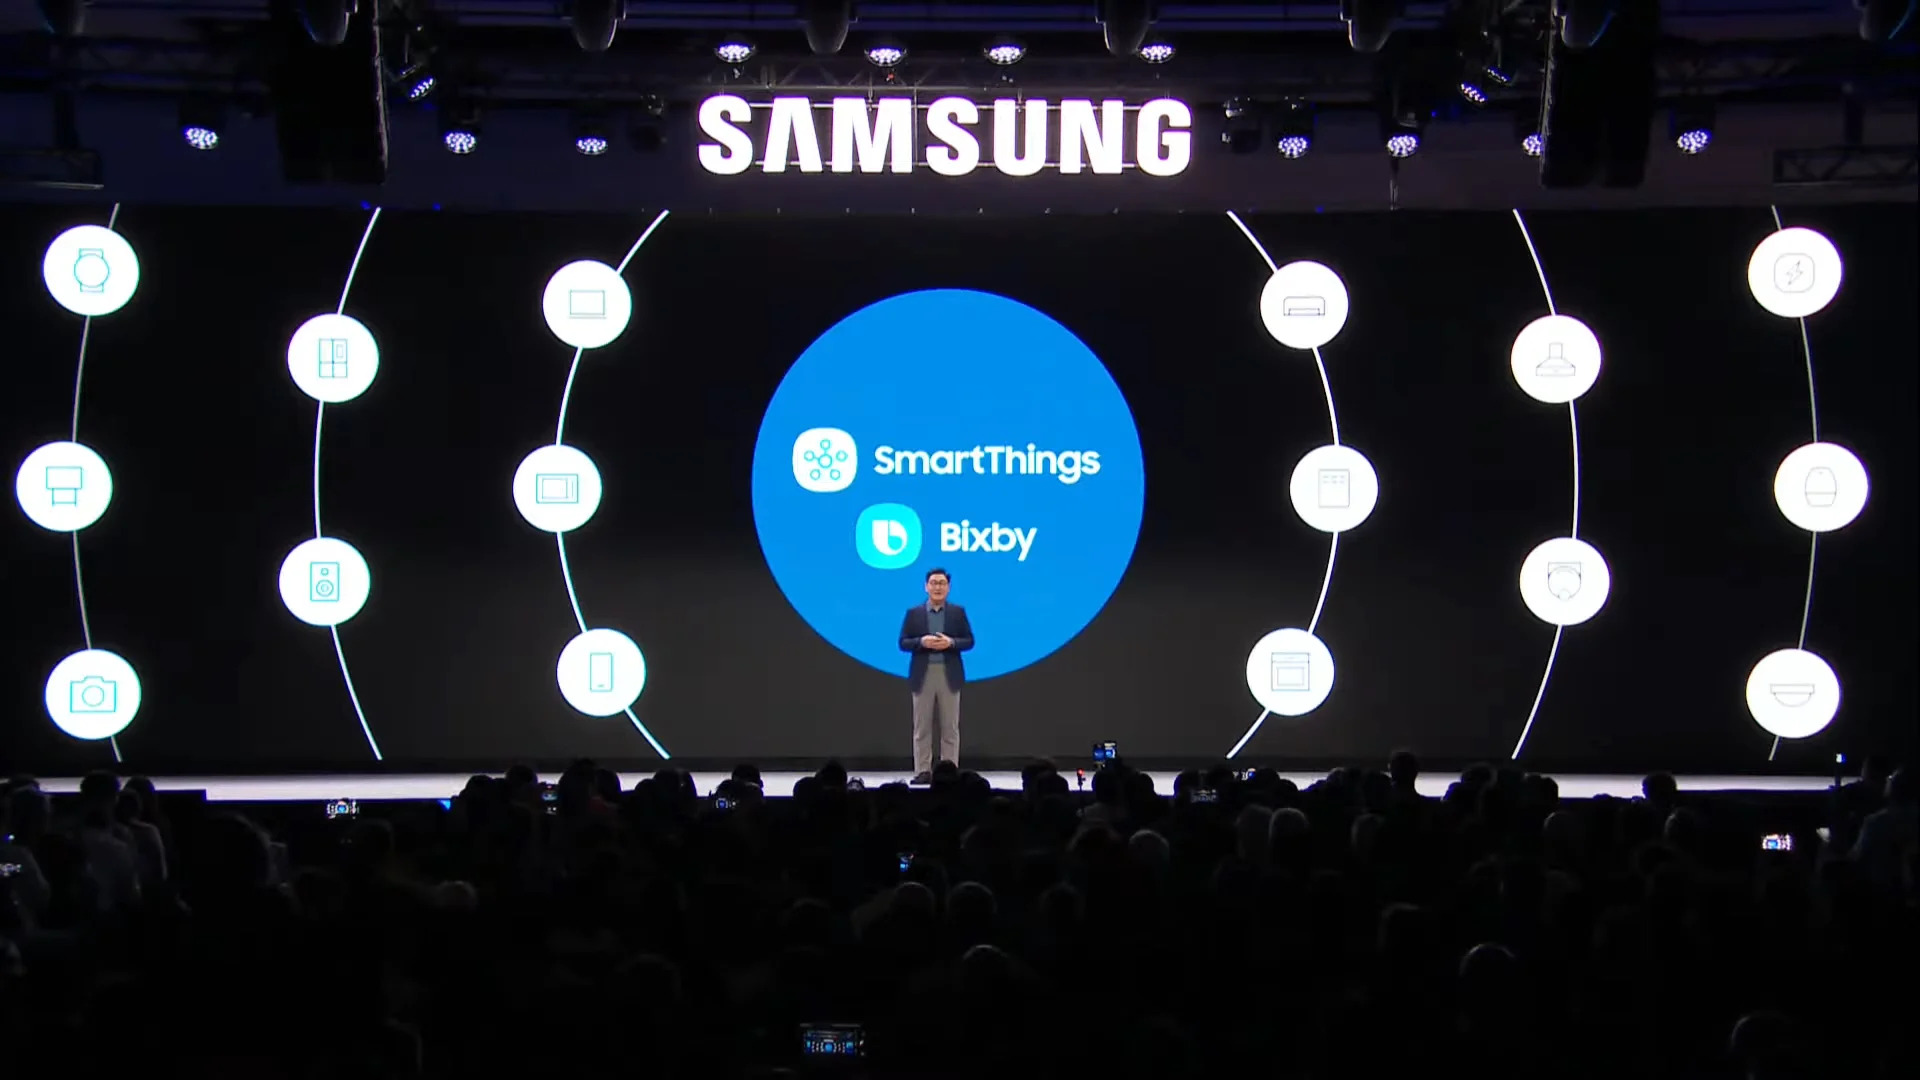 Samsung SmartThings gets an update with new design and features